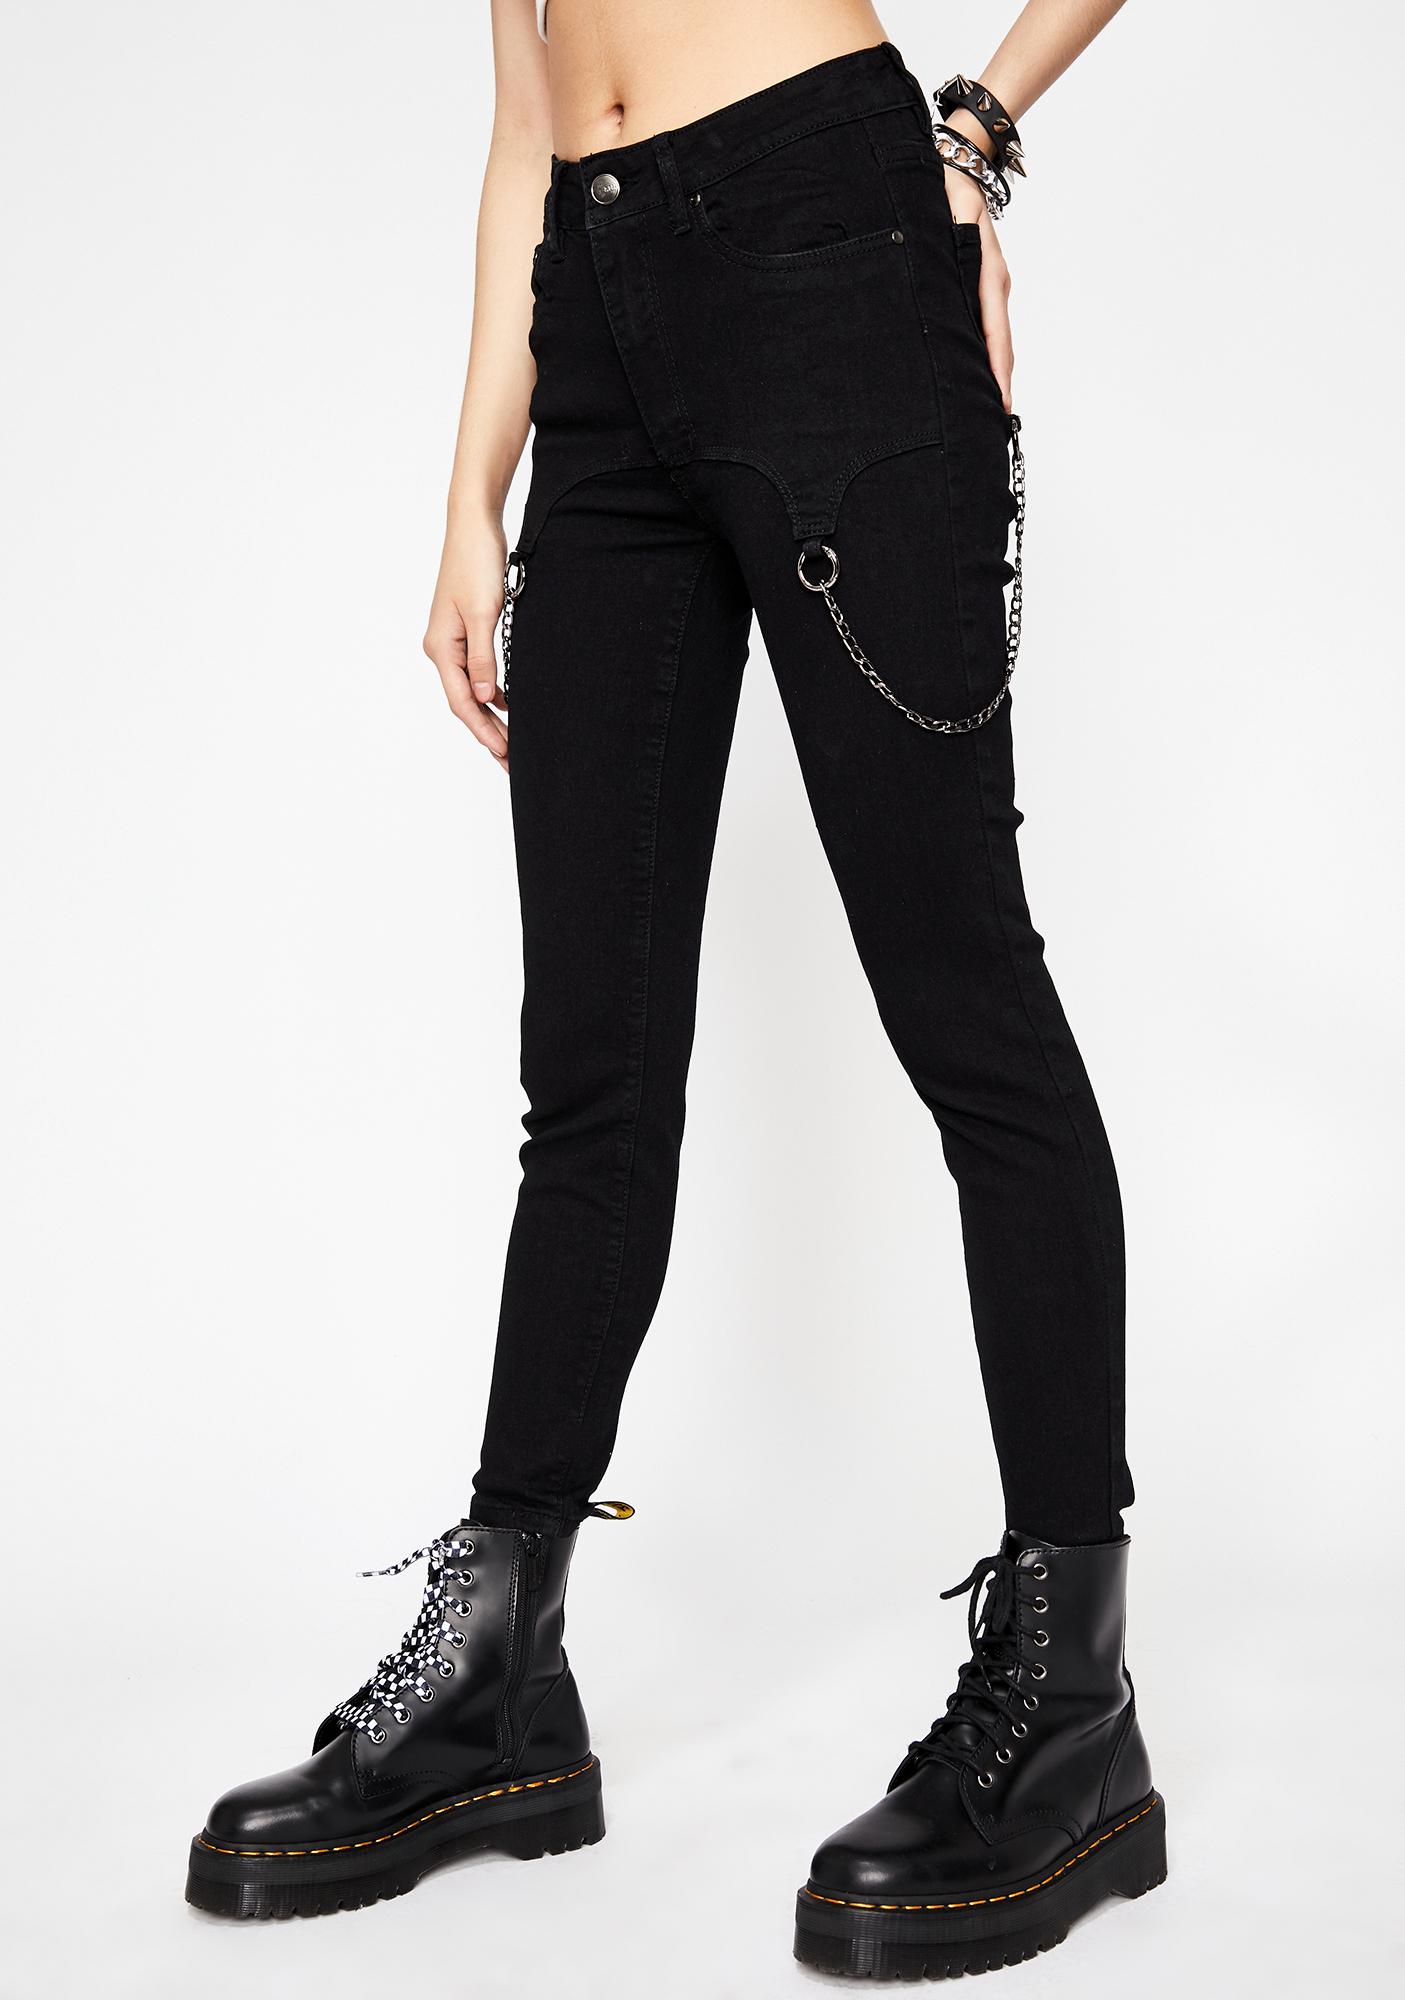 Black Skinny Jeans With Side Chains | Dolls Kill